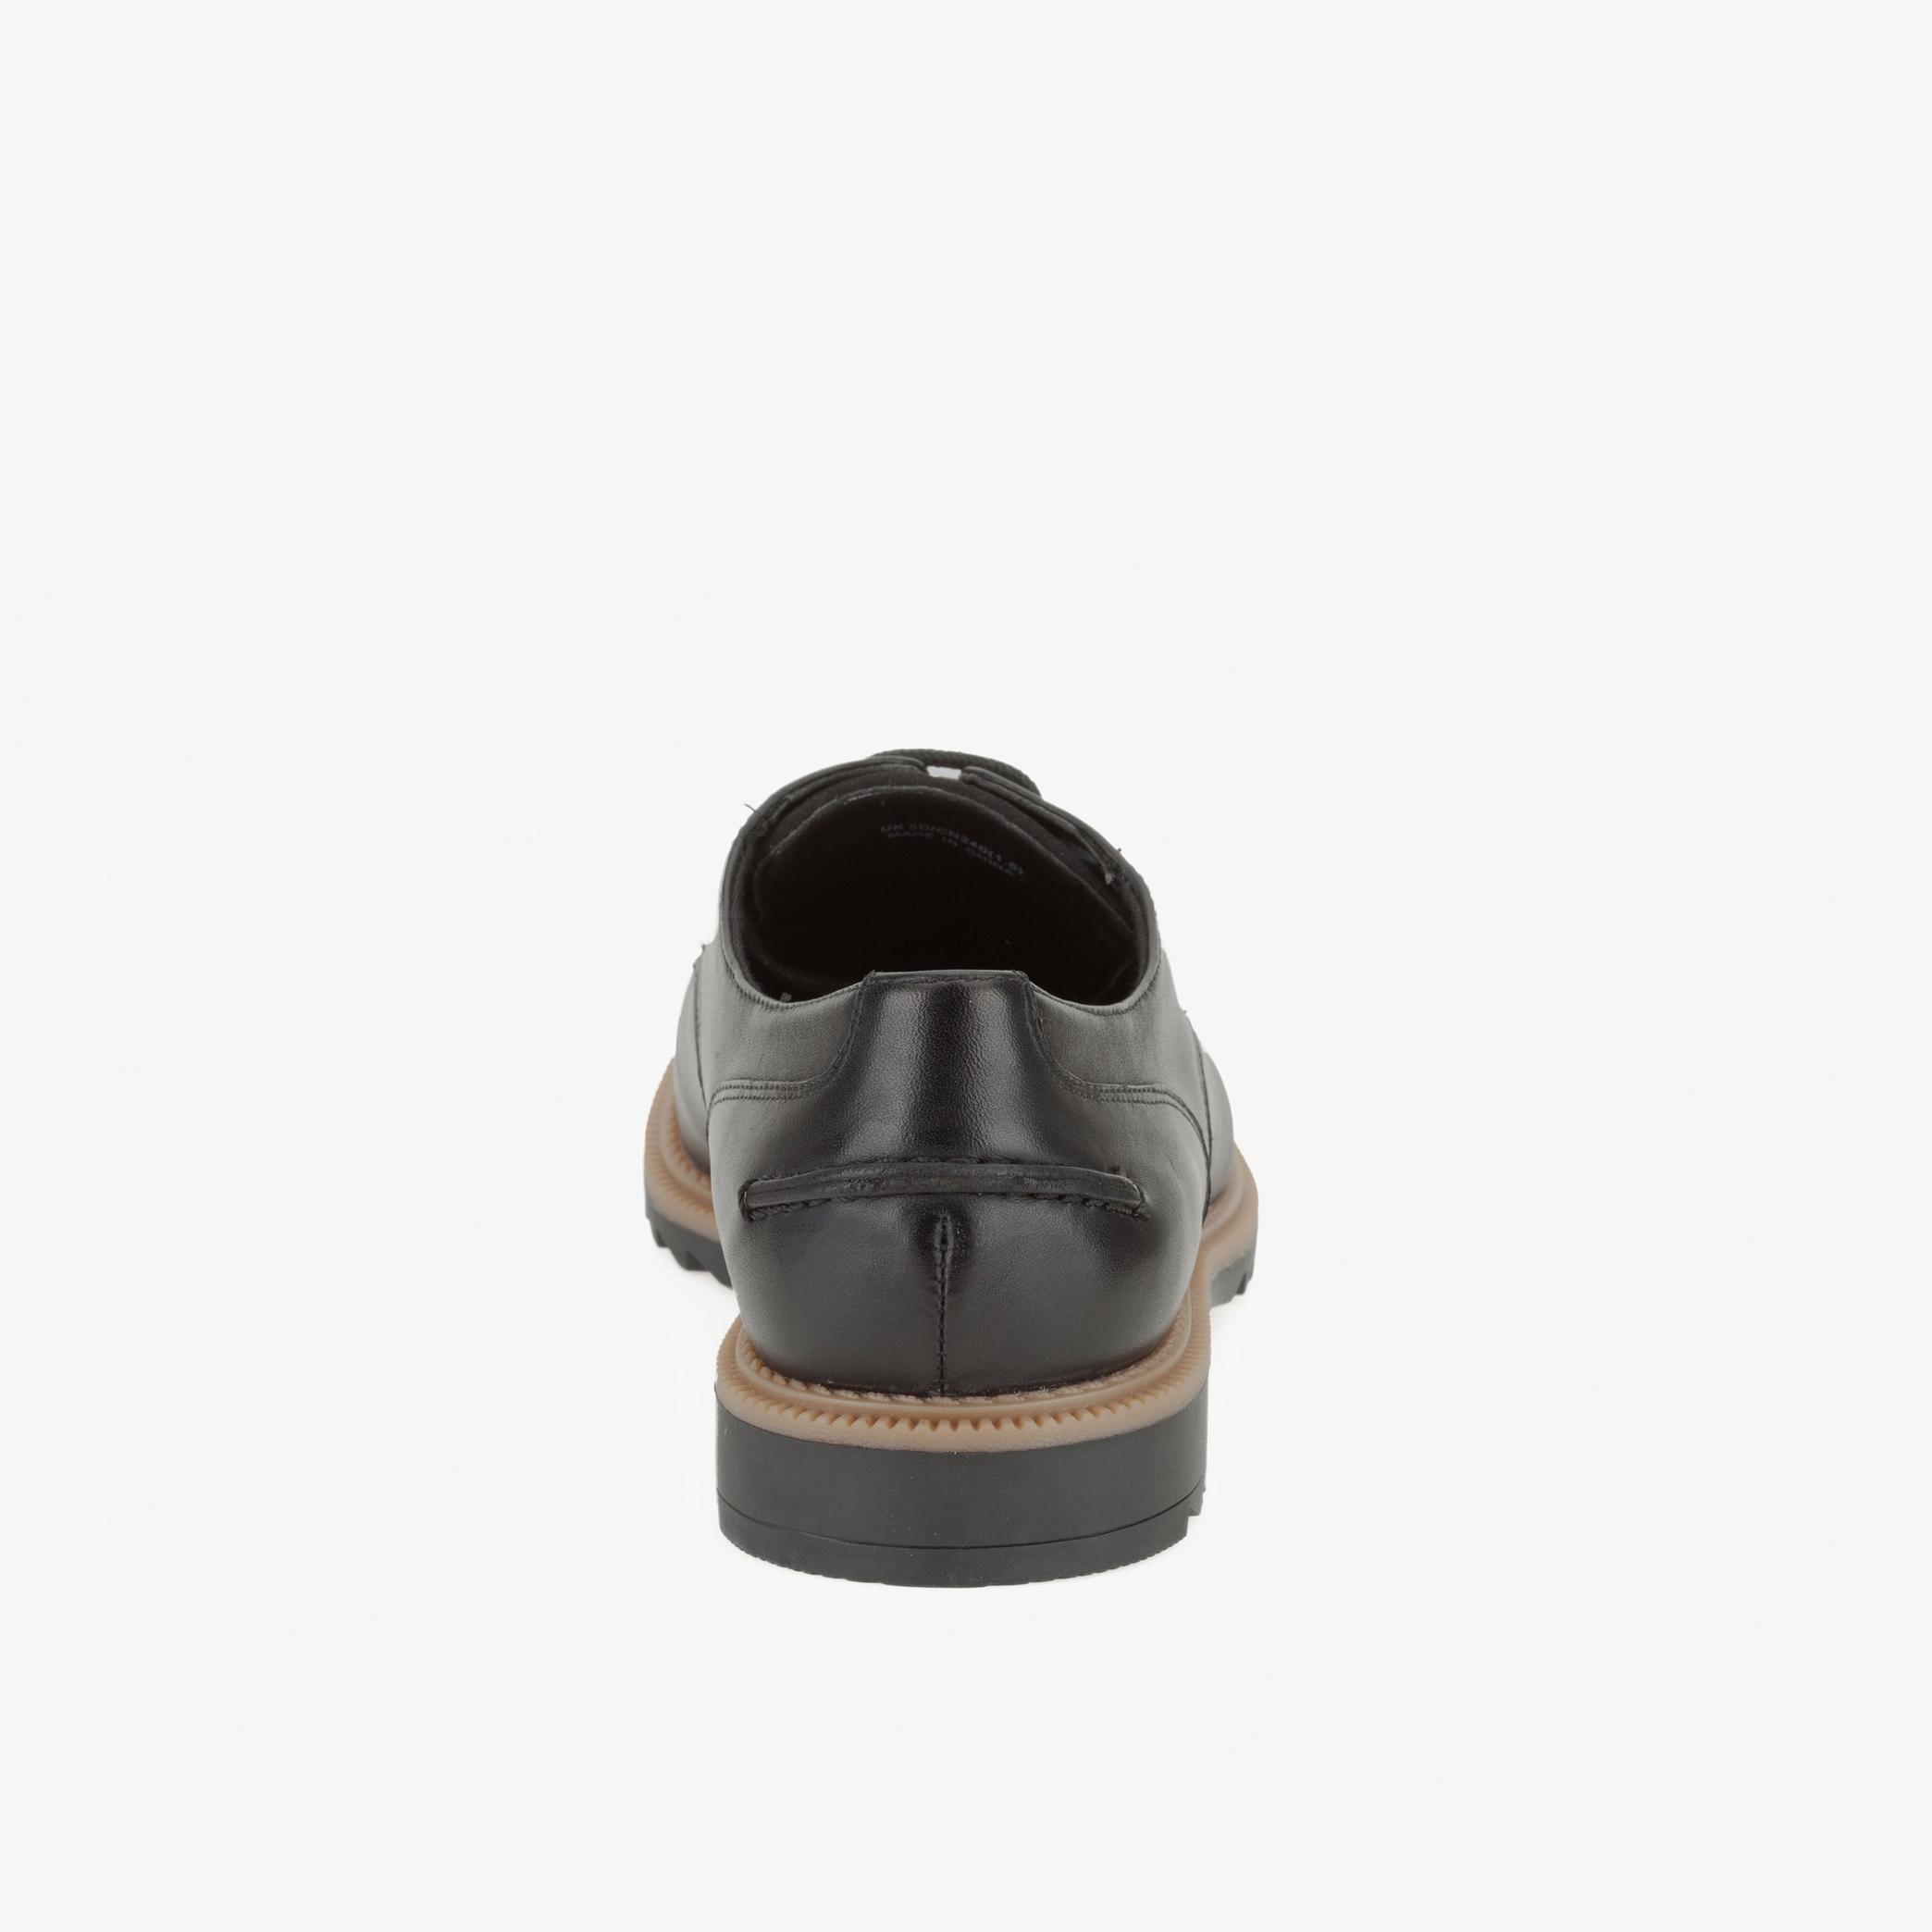 Griffin Mabel Black Leather Brogues, view 4 of 5